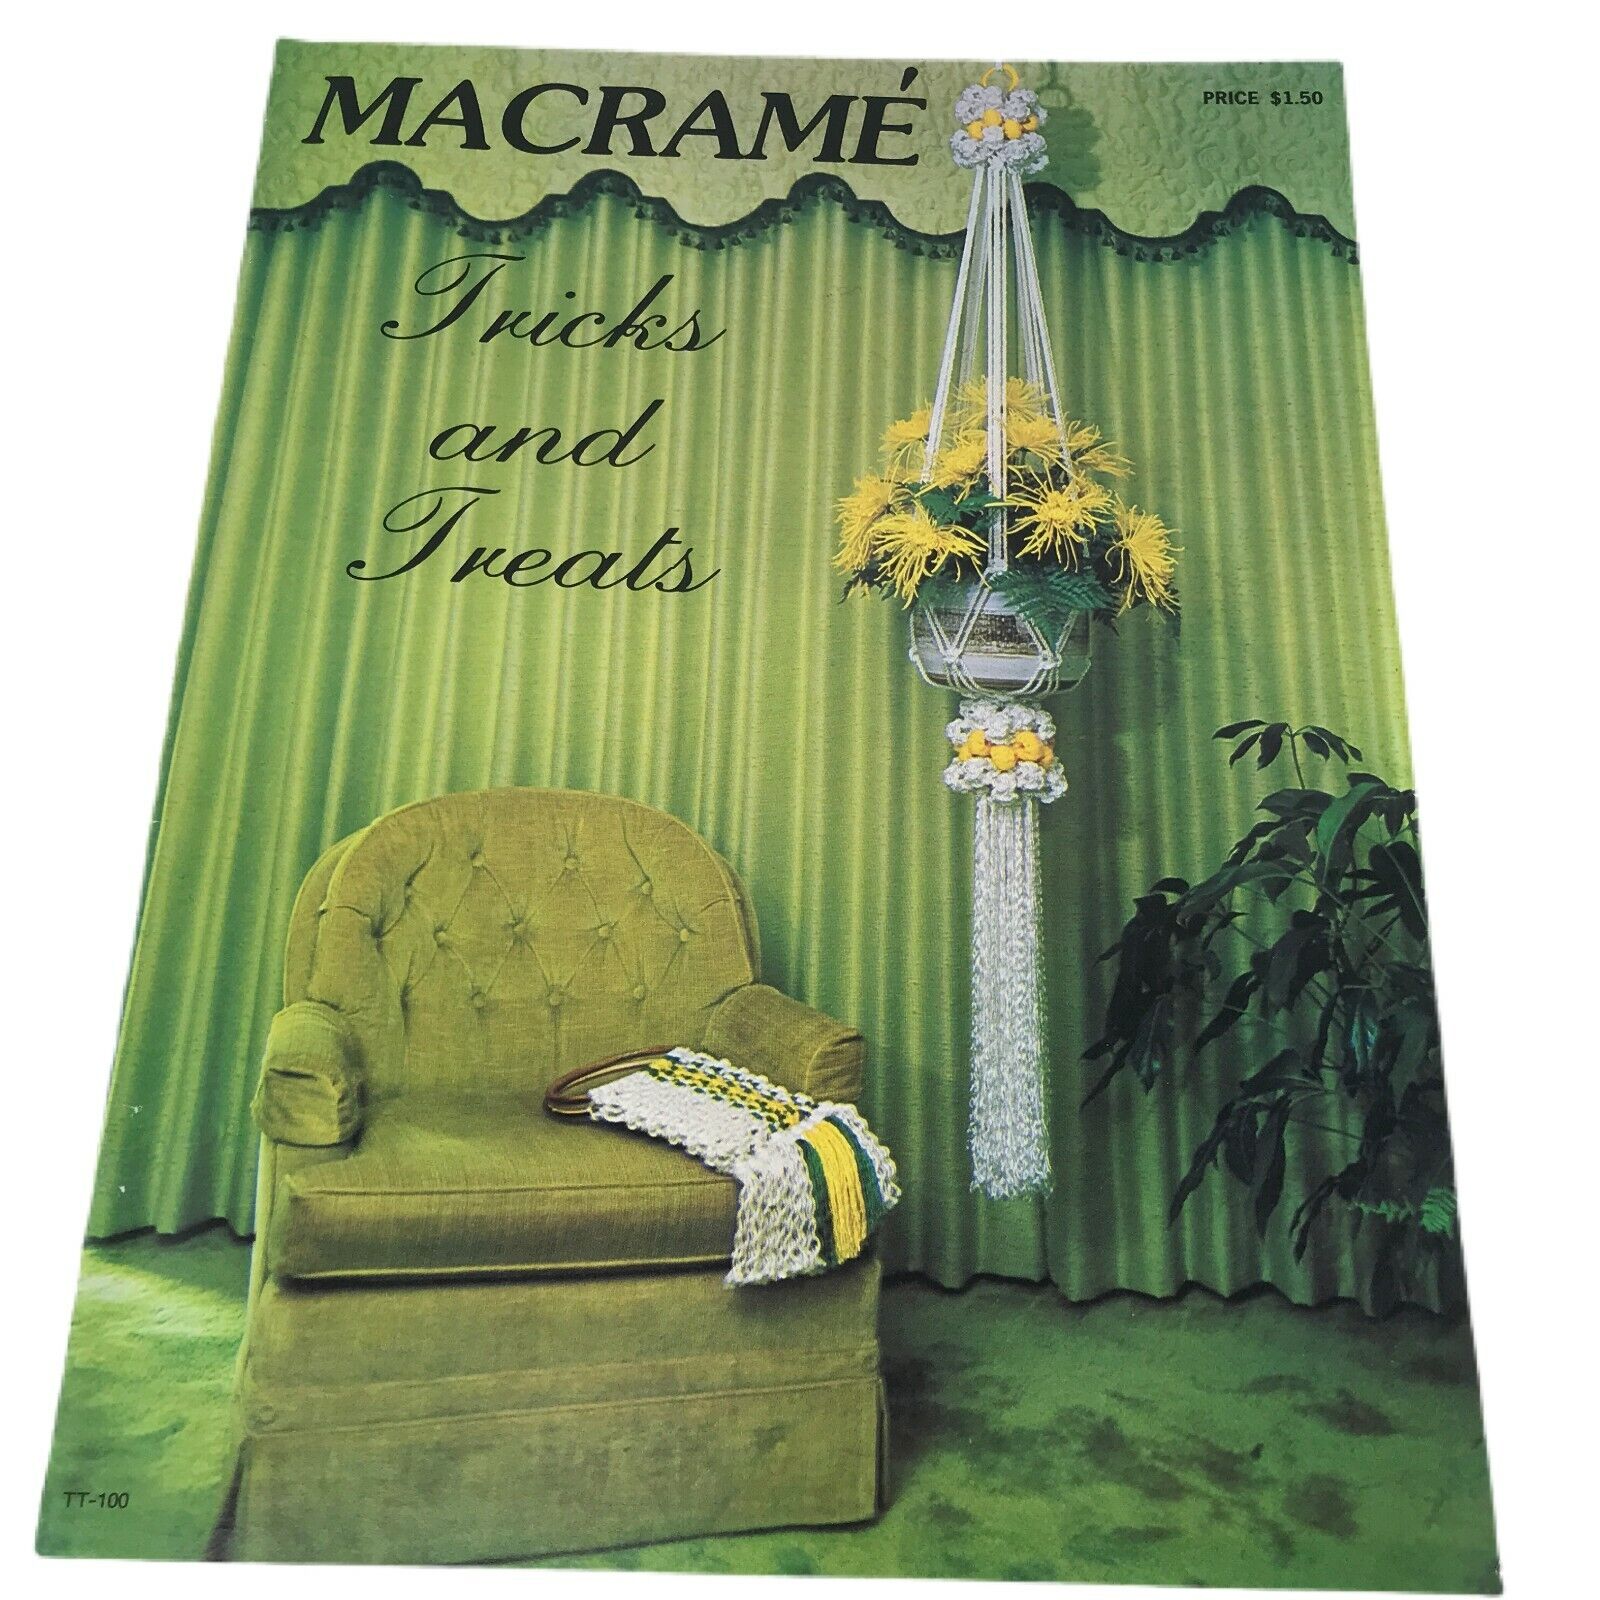 Vintage 70s How To Book Macrame Tricks and Treats Patterns Pot H